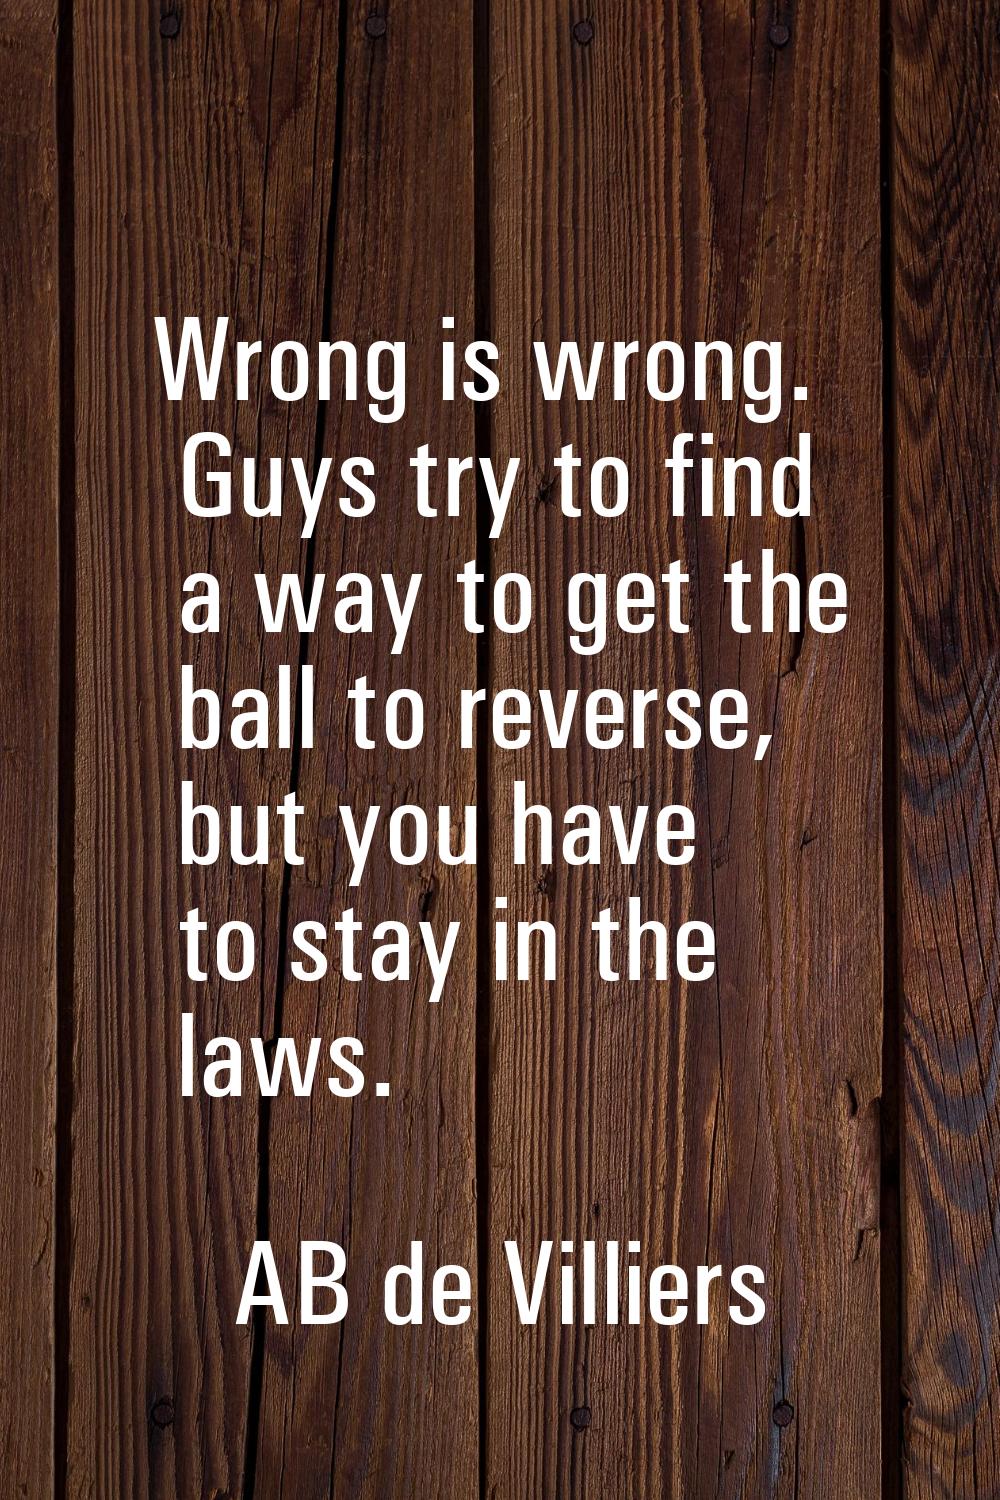 Wrong is wrong. Guys try to find a way to get the ball to reverse, but you have to stay in the laws